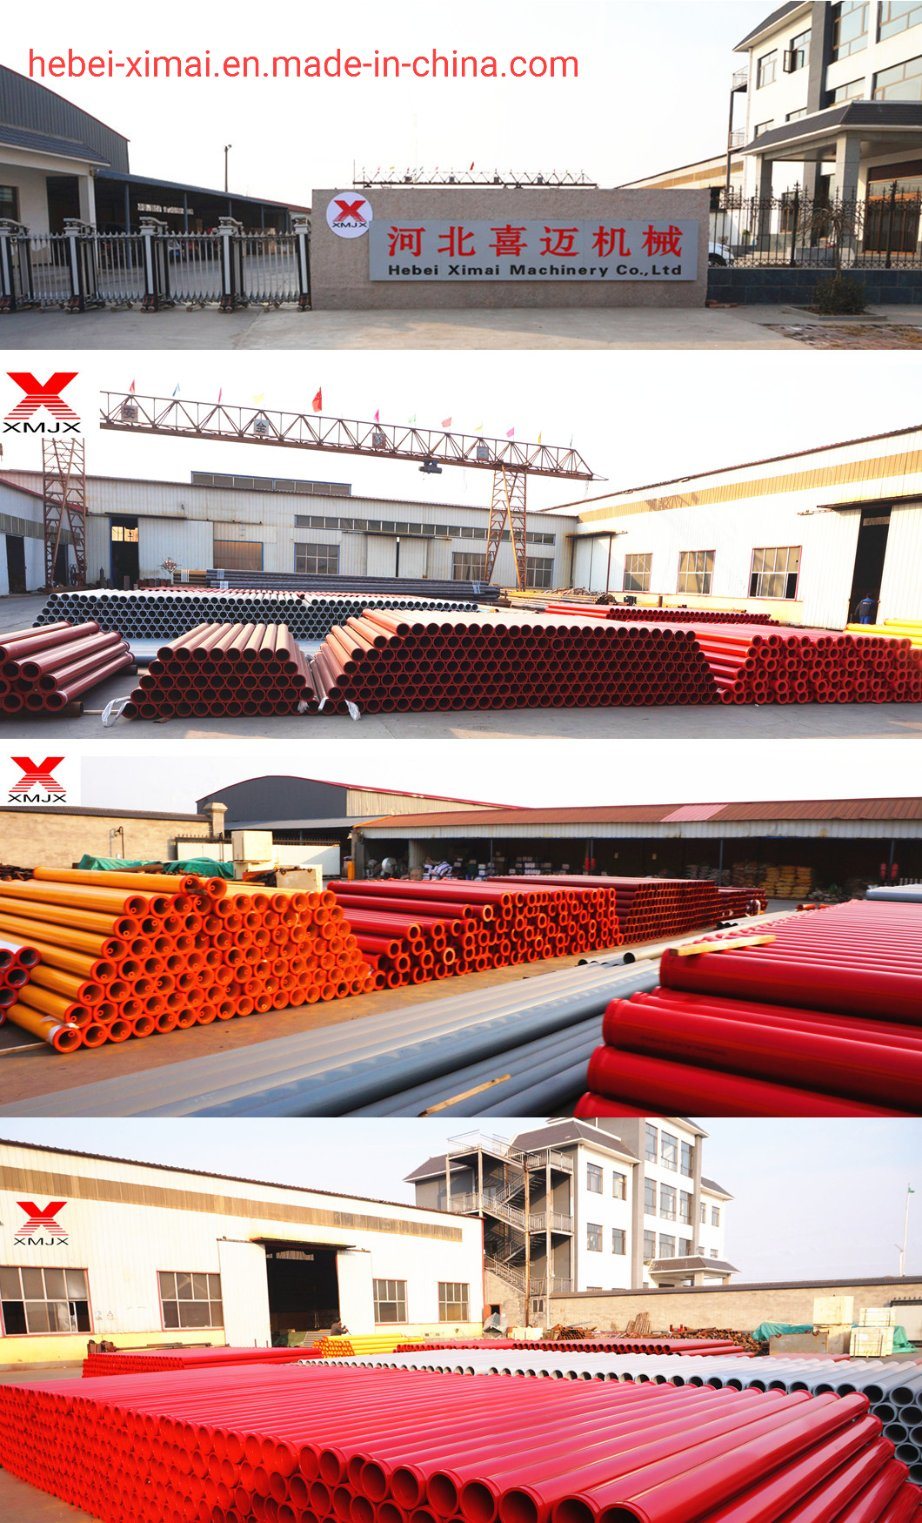 Competitive Price with Best Quality Concrete Lime Pipe